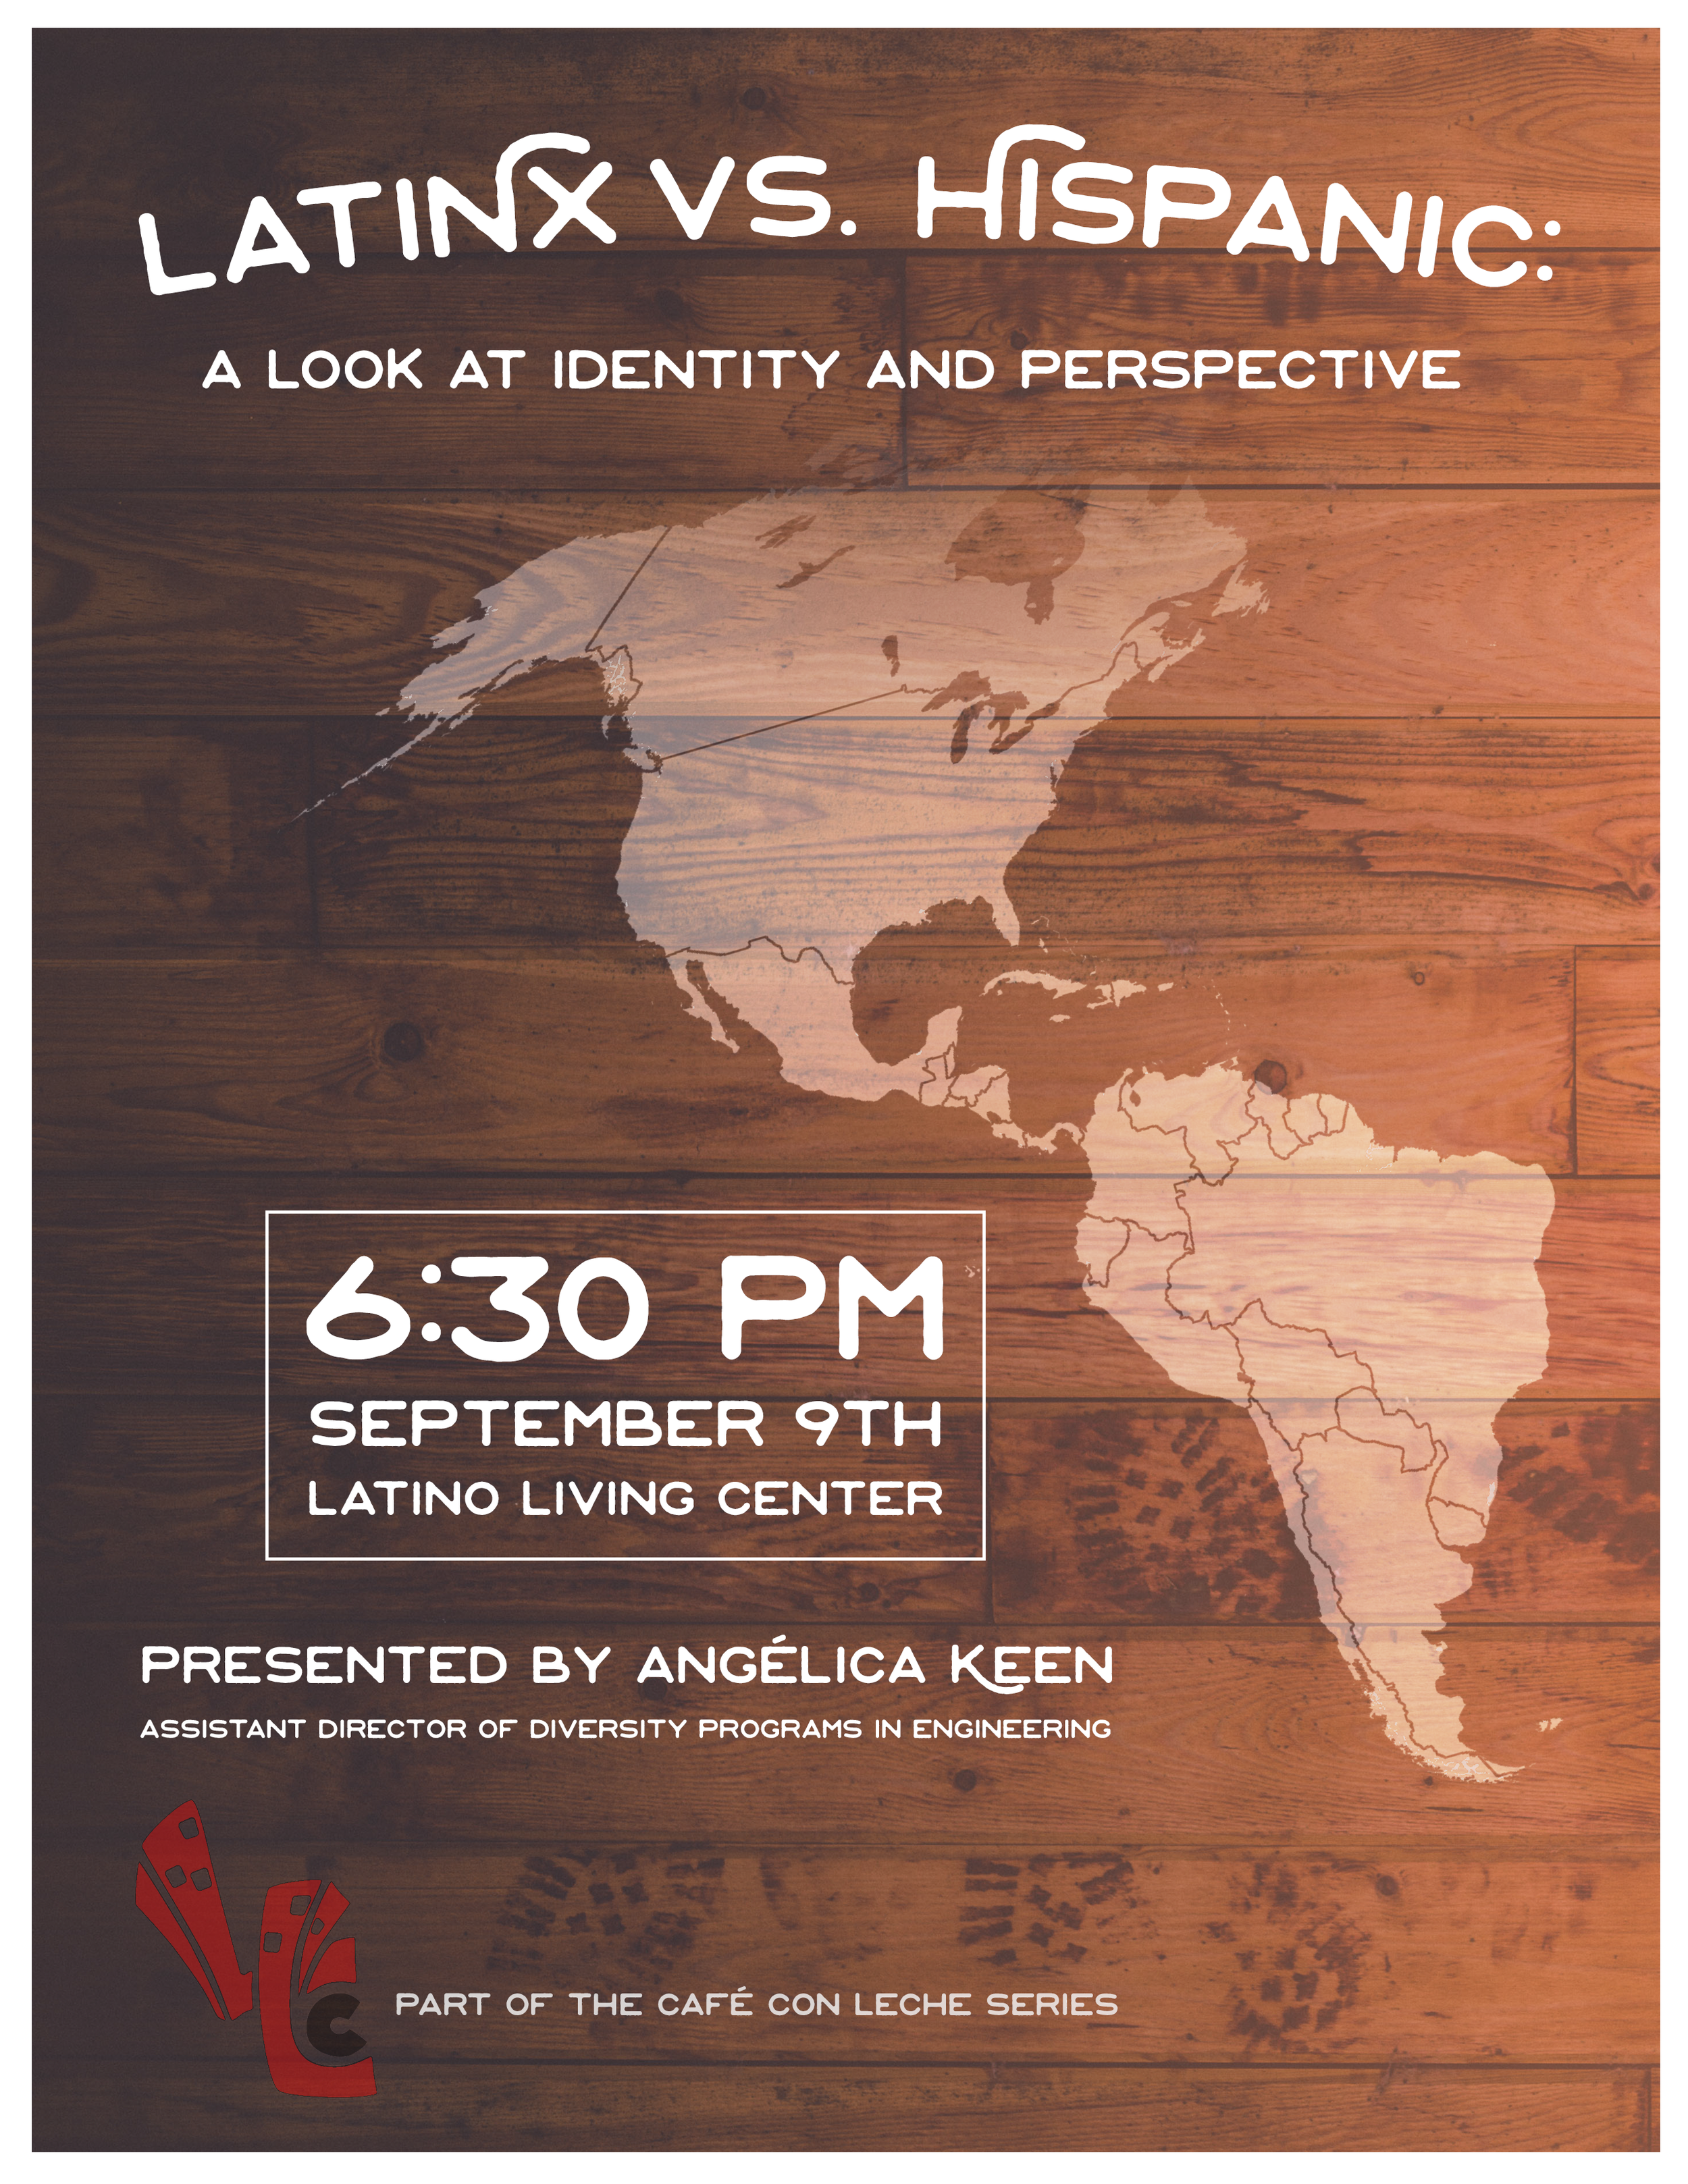  Poster for an event hosted by the Latino Living Center. The program was about the origins of the words  Latinx  and  Hispanic , and its complicated geographic and social histories. (2016) 